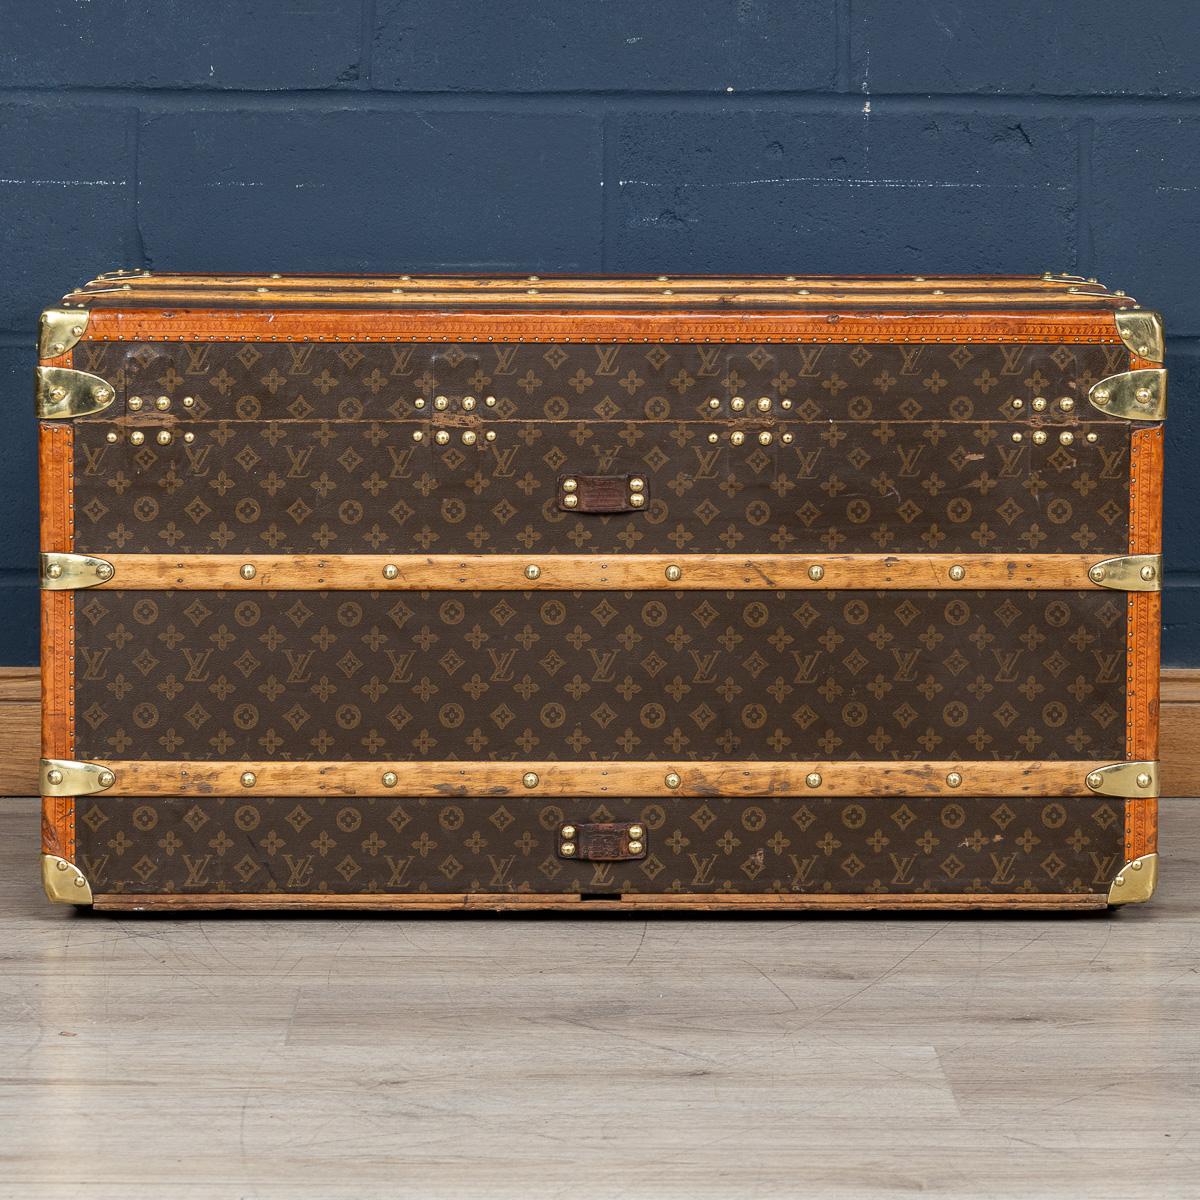 20th Century Louis Vuitton Trunk In Monogram Canvas, France c.1930 In Good Condition For Sale In Royal Tunbridge Wells, Kent